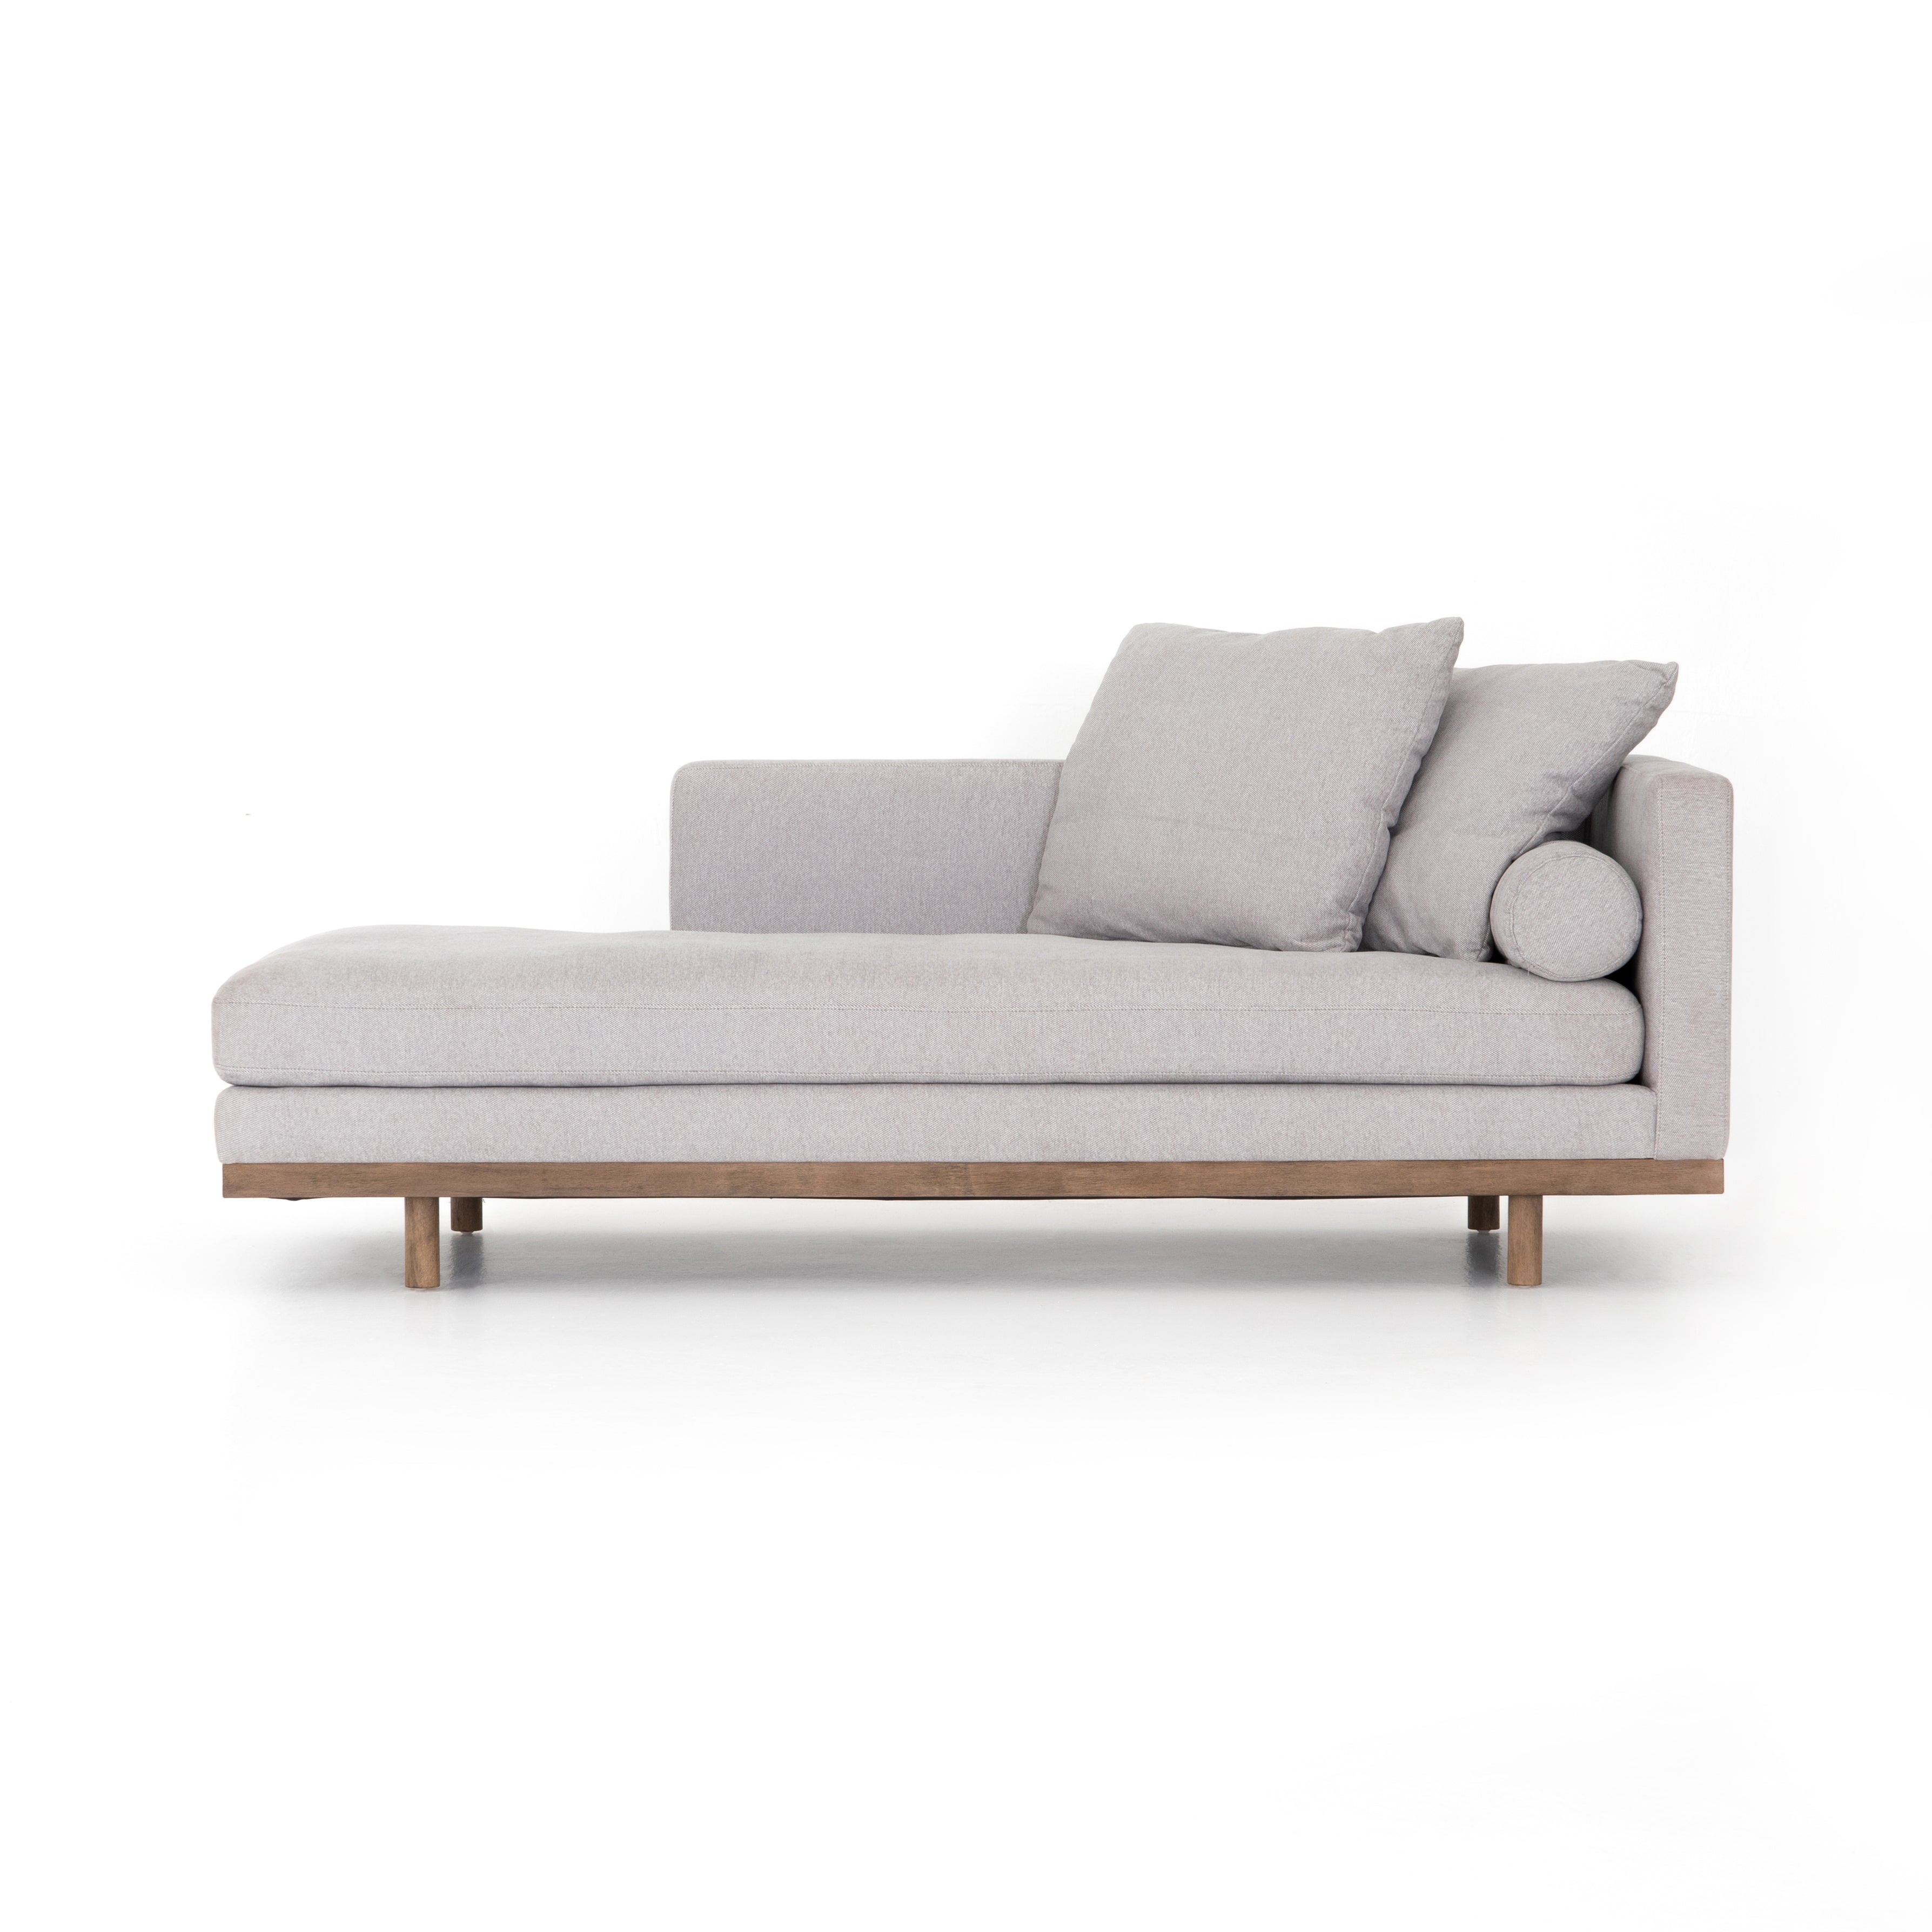 This Brady Chaise is upholstered in gorgeous, vail silver/distressed natural performance-grade with a beautiful parawood base.  Place in your living room or lounge area and transform your morning coffee routine space!  Overall Dimensions: 85.00"w x 35.00"d x 29.00"h Colors: Vail Silver, Distressed Natural Materials: 100% Polyester, Parawood Fabric: Performance